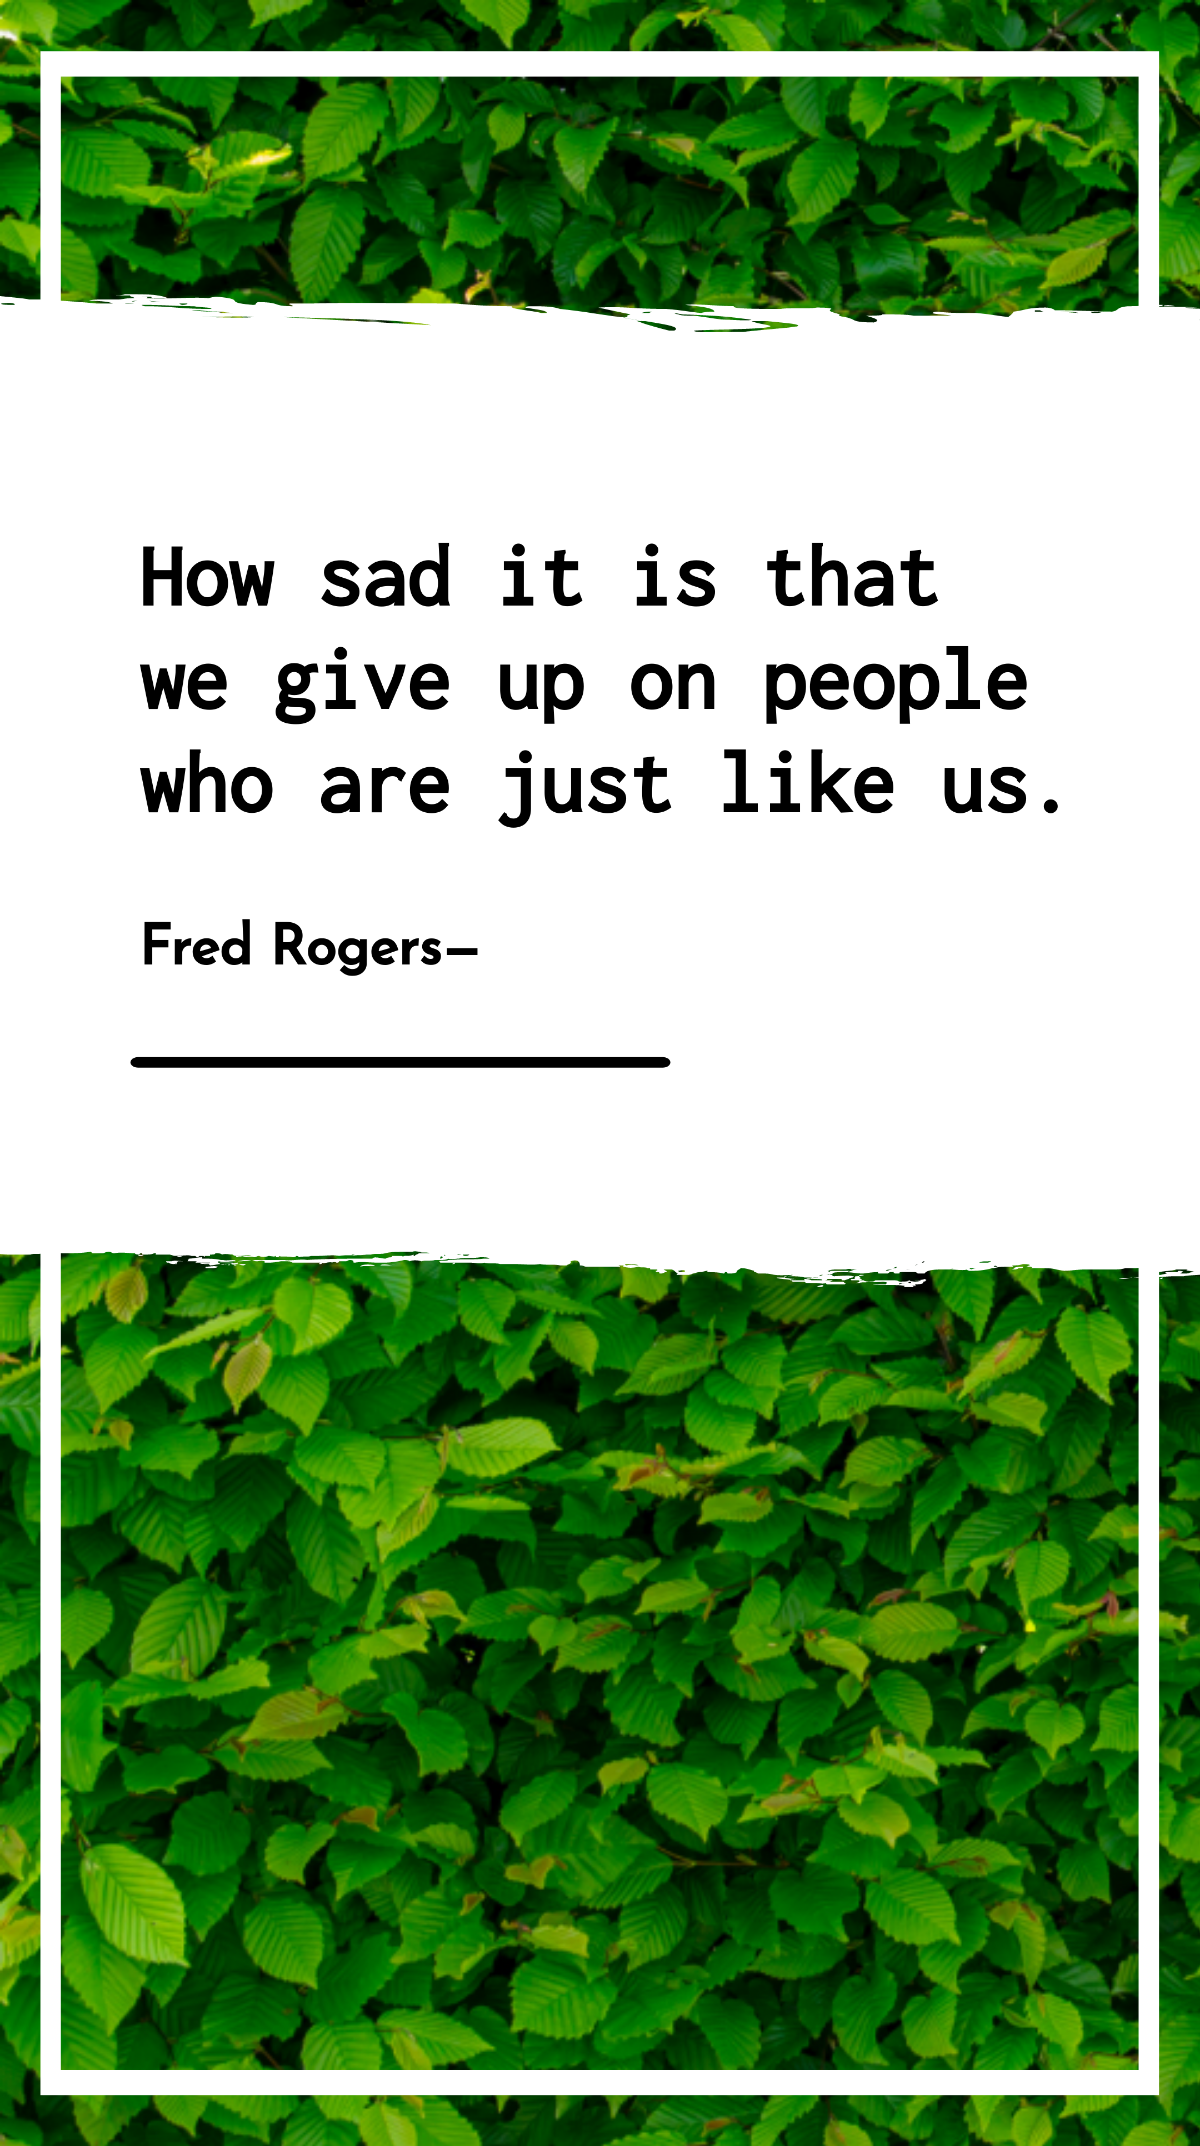 Fred Rogers - How sad it is that we give up on people who are just like us. Template